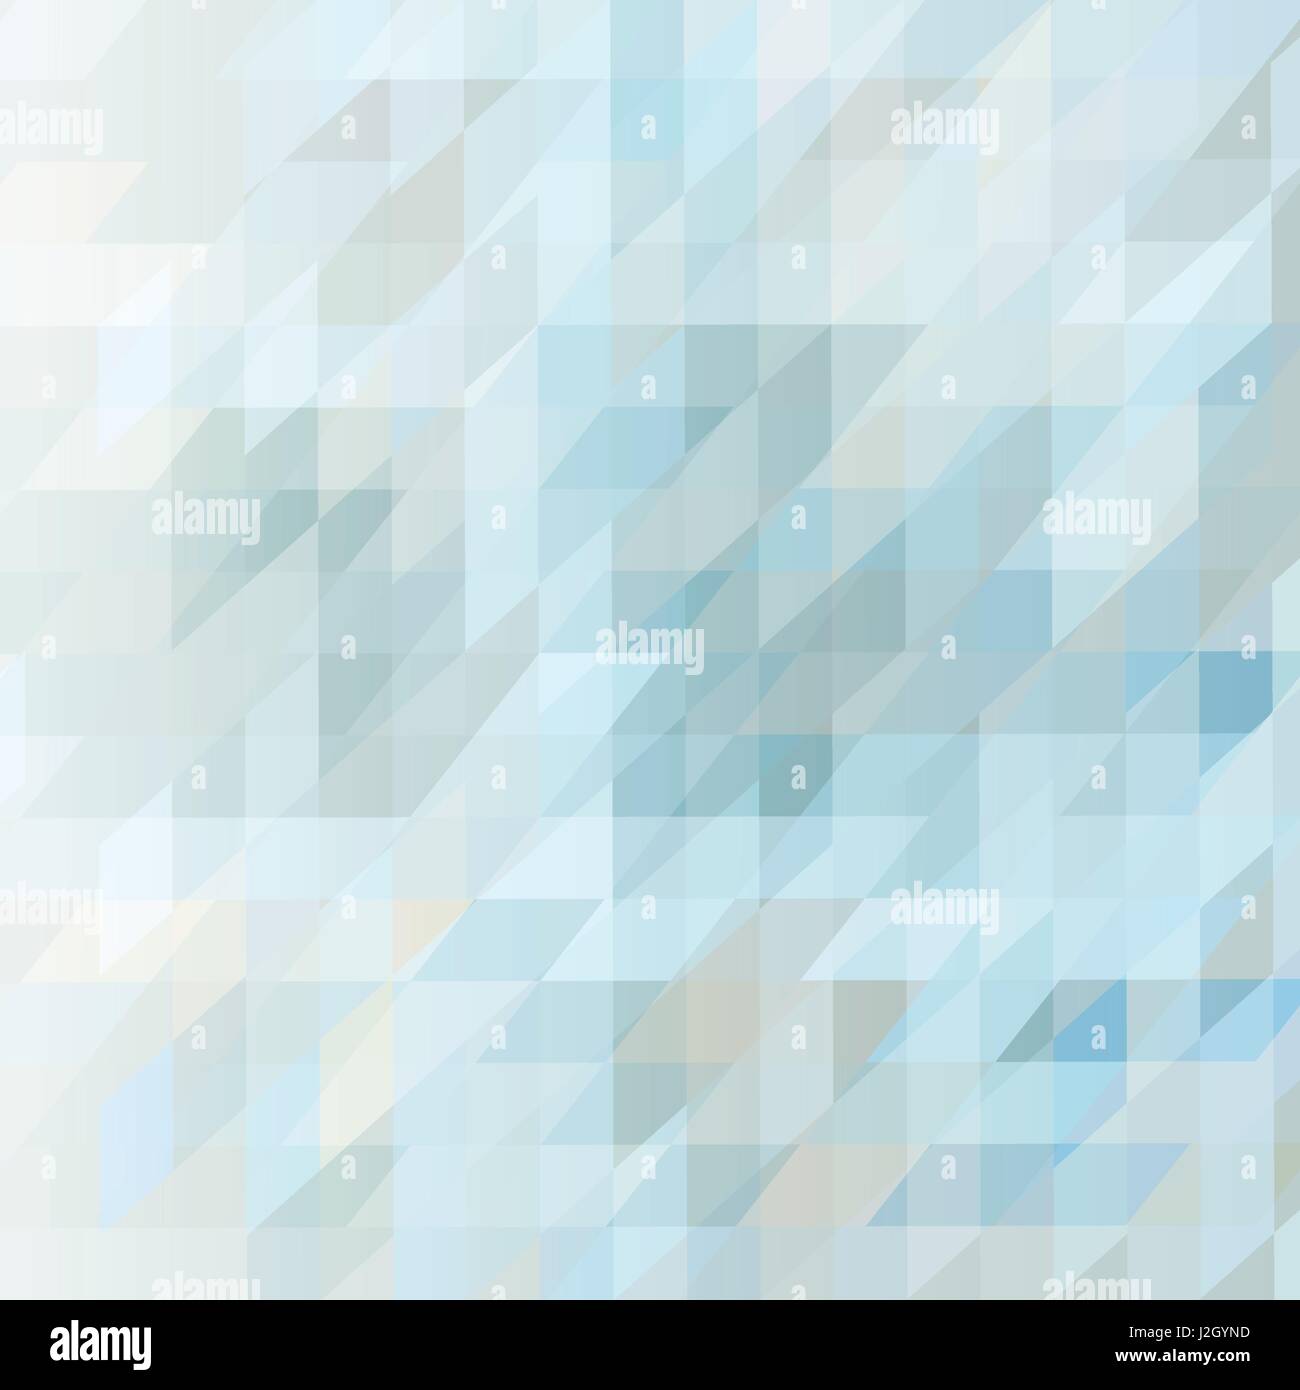 Abstract background in light blue tones. Stock Vector